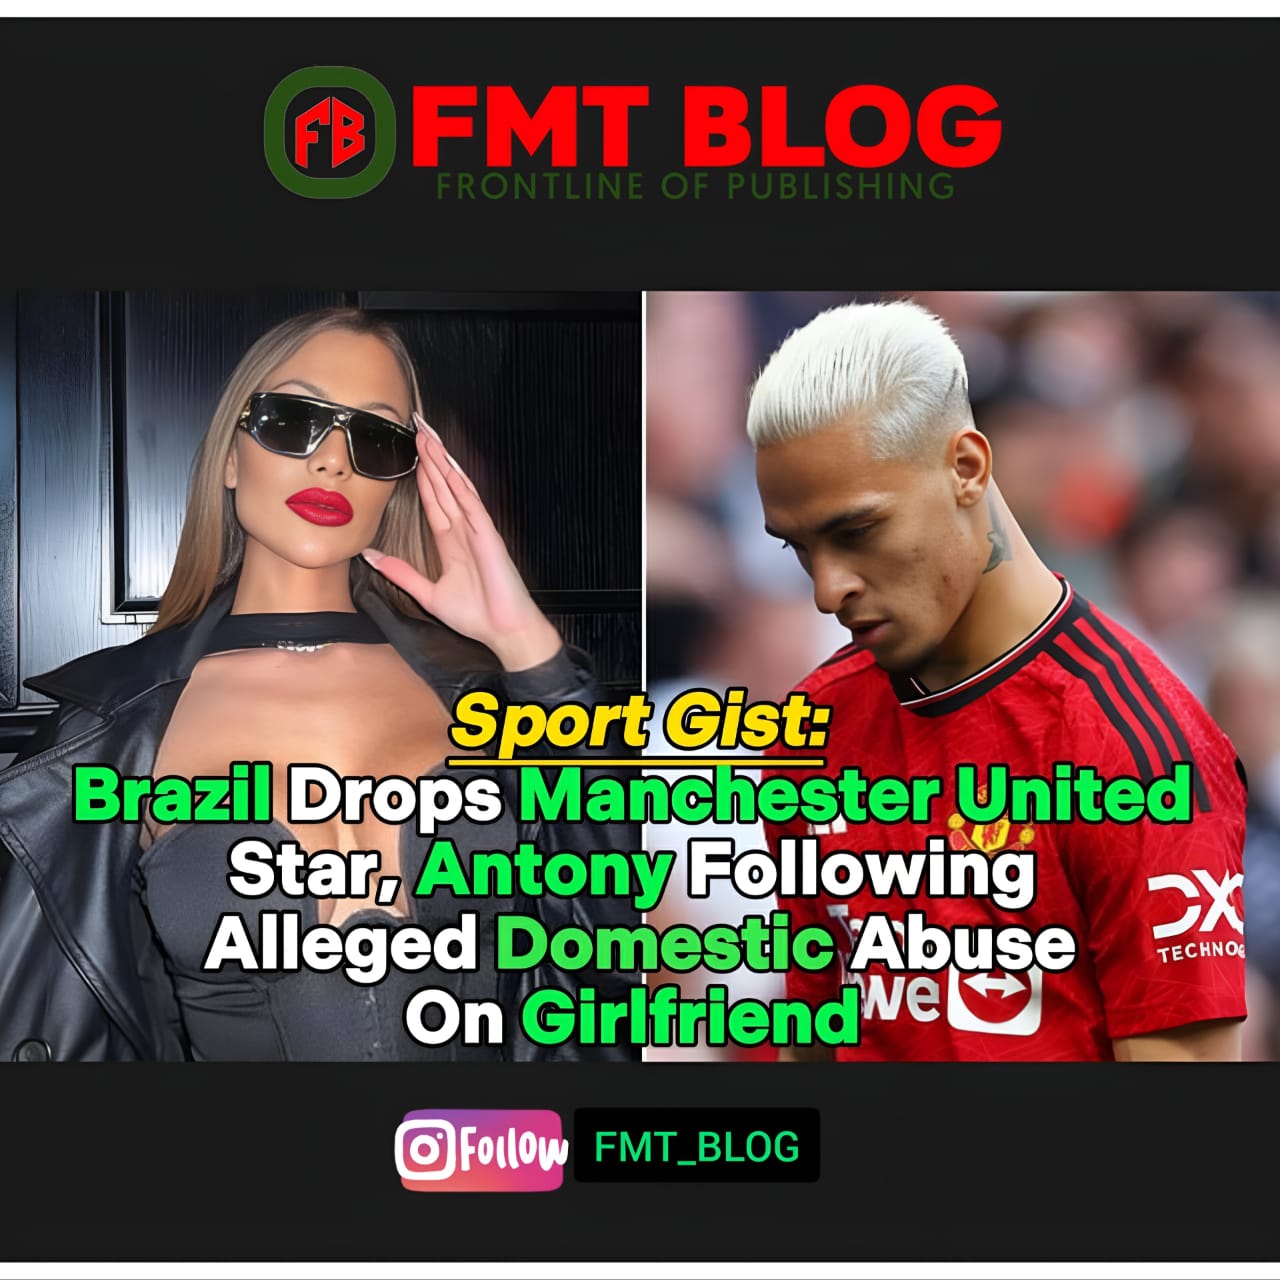 Brazil Drops Manchester United Star, Antony Following Alleged Domestic Abuse On Girlfriend